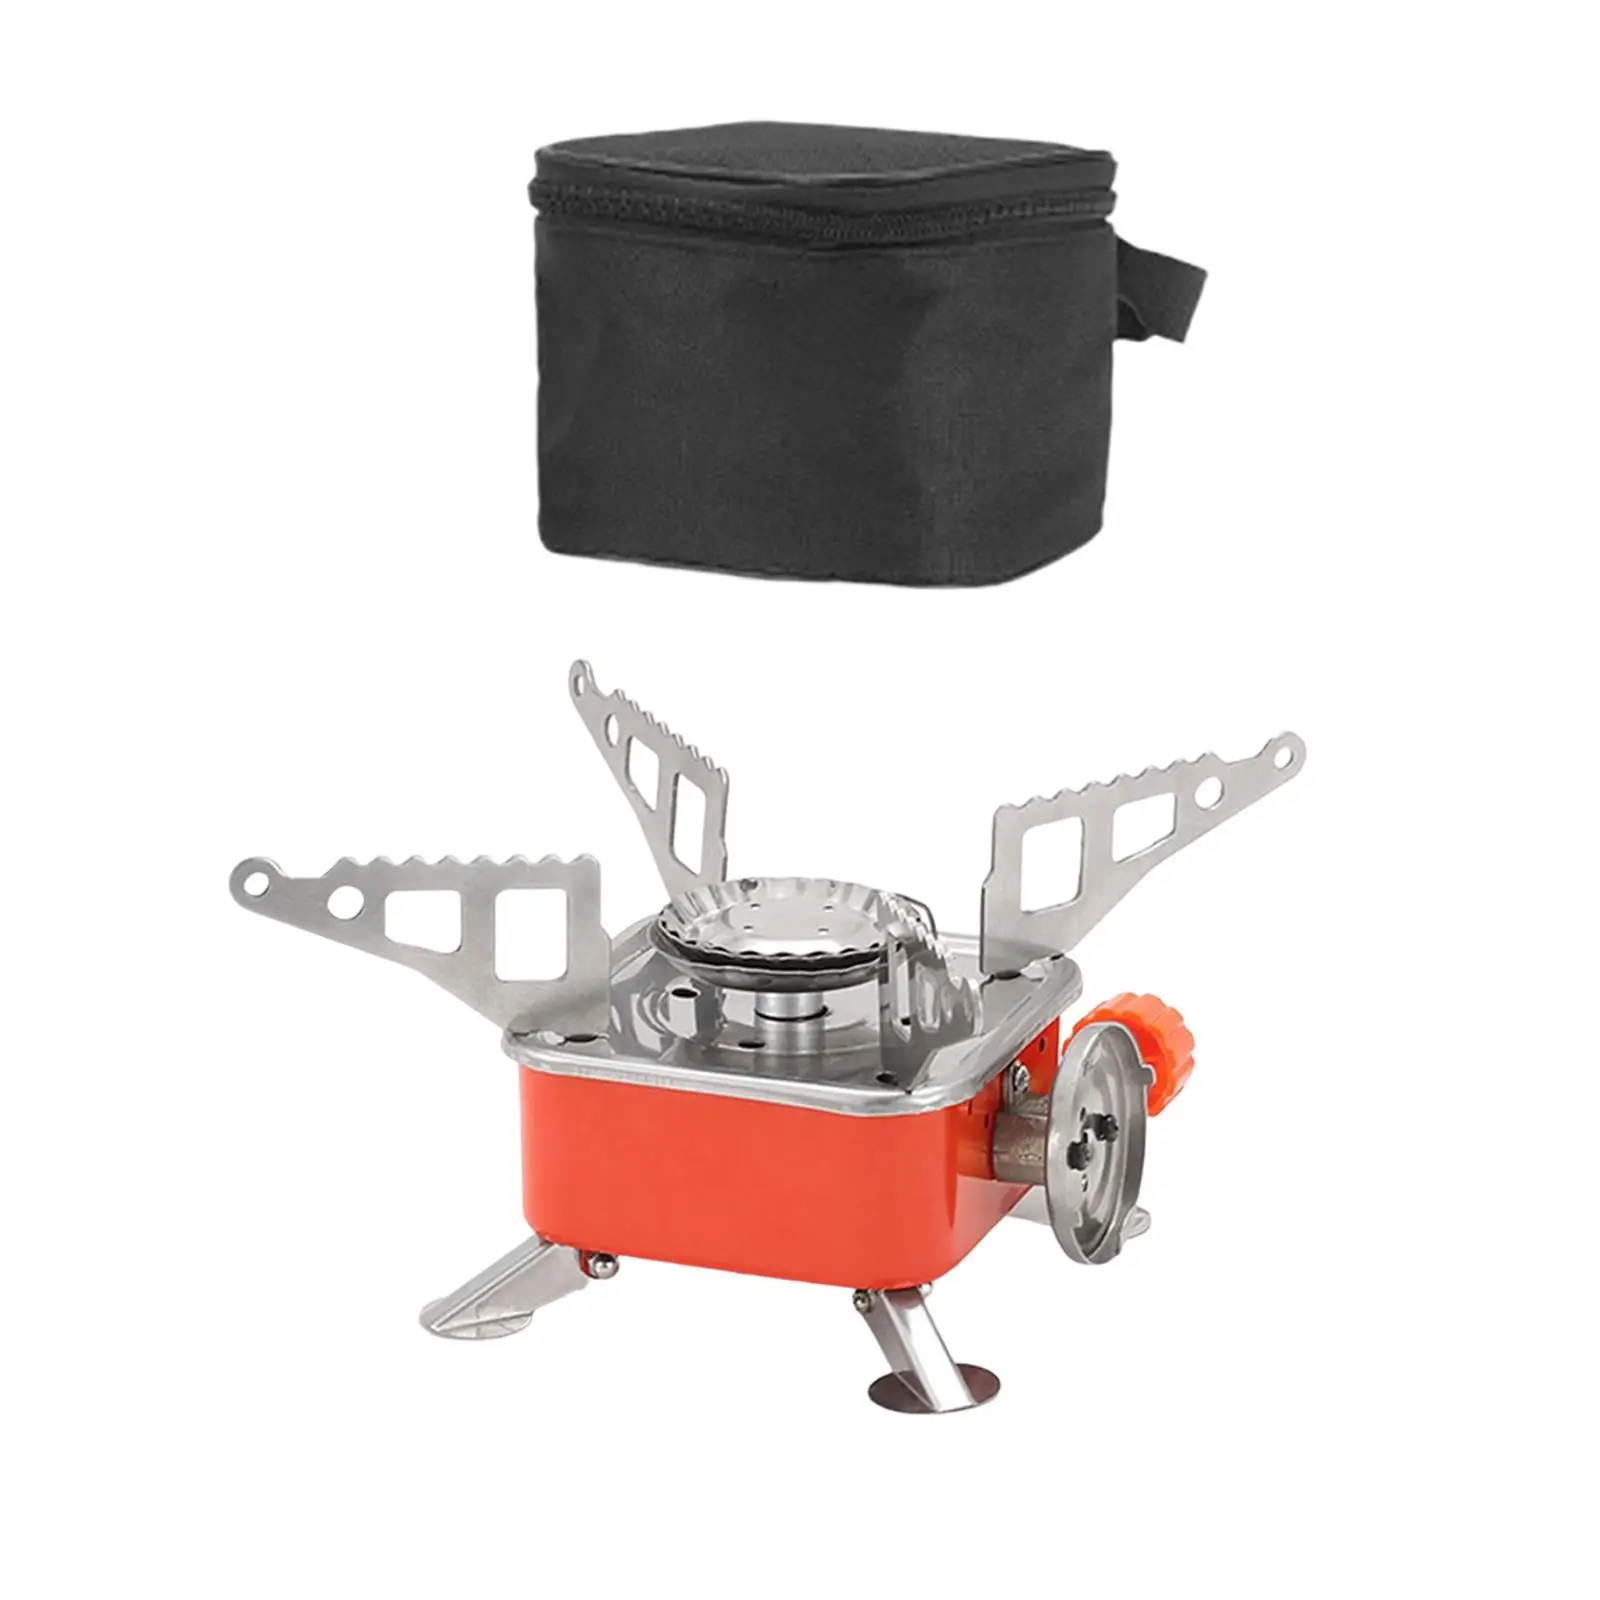 Portable Camping Gas Stove Mini Folding for Outdoor Hiking Backpacking